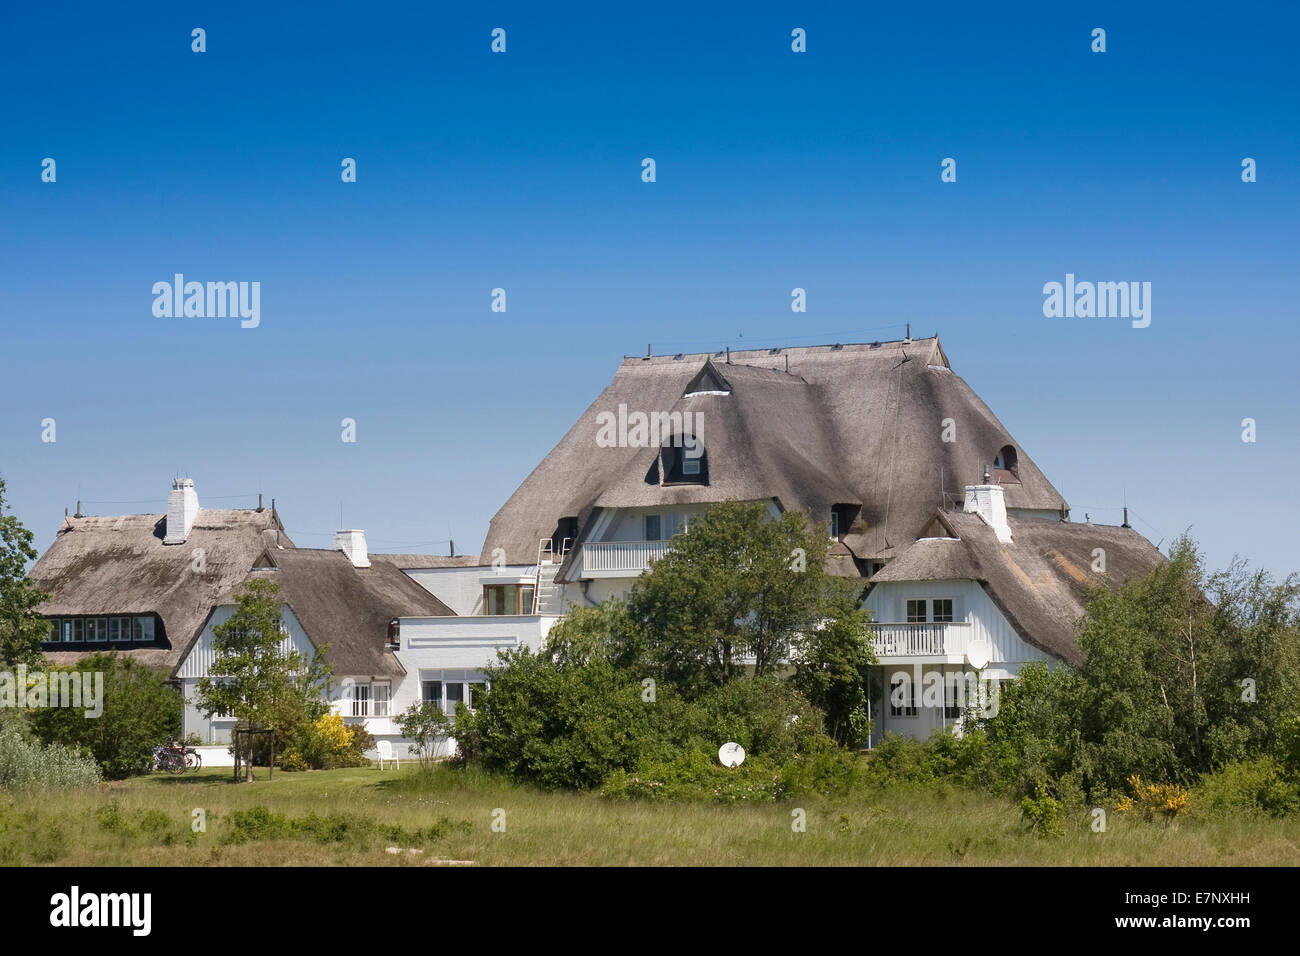 Bay, federal republic, roof, German, Germany, Europe, framework, half-timbered house, facade, house, home, house facade, Howacht Stock Photo